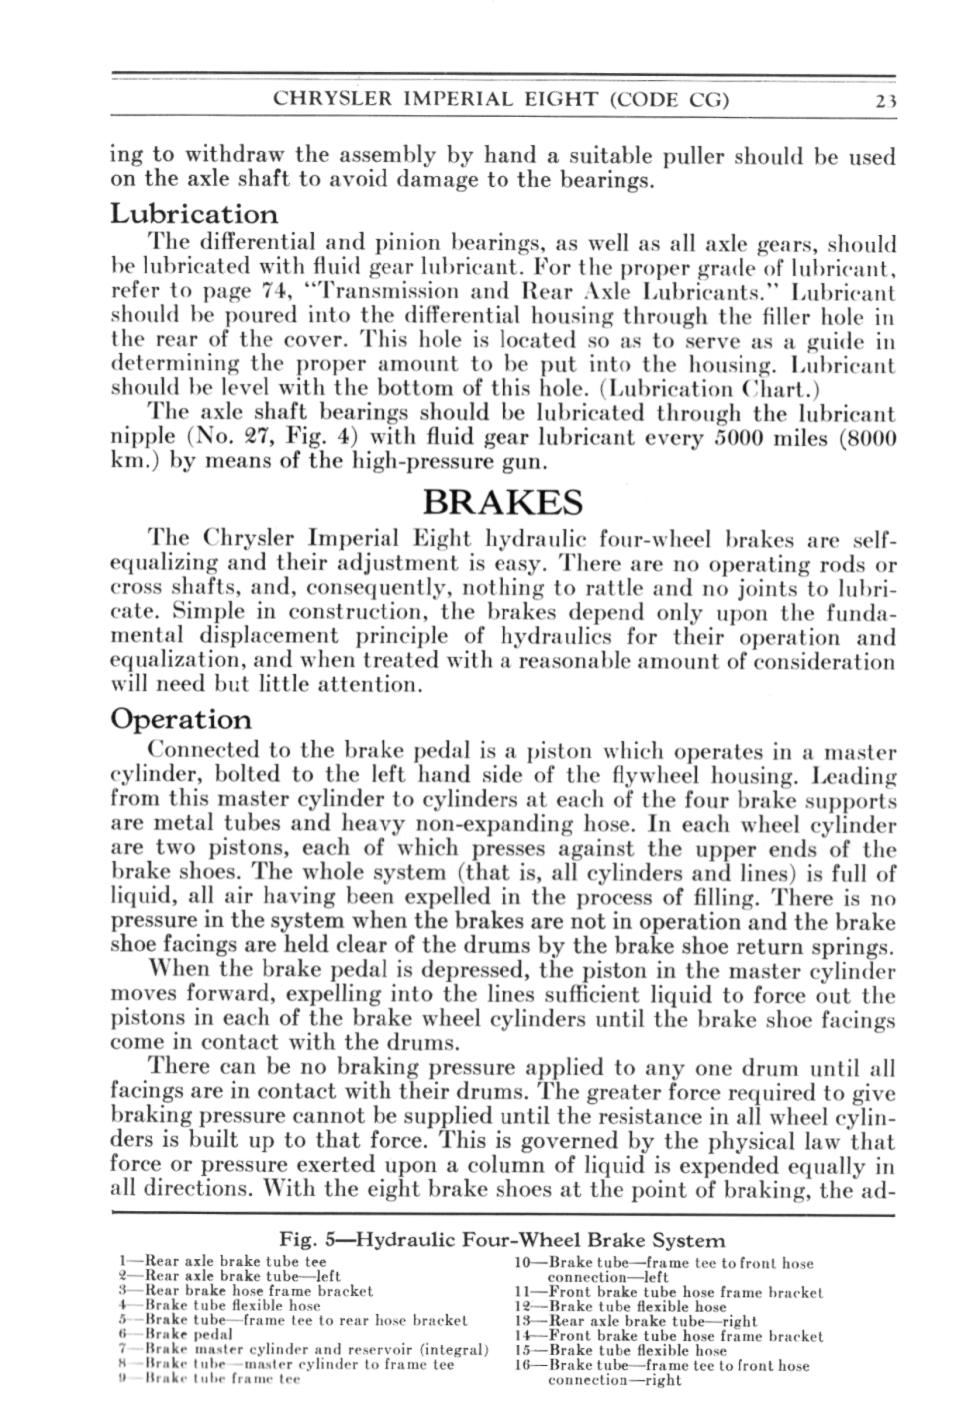 1931 Chrysler Imperial Owners Manual Page 13